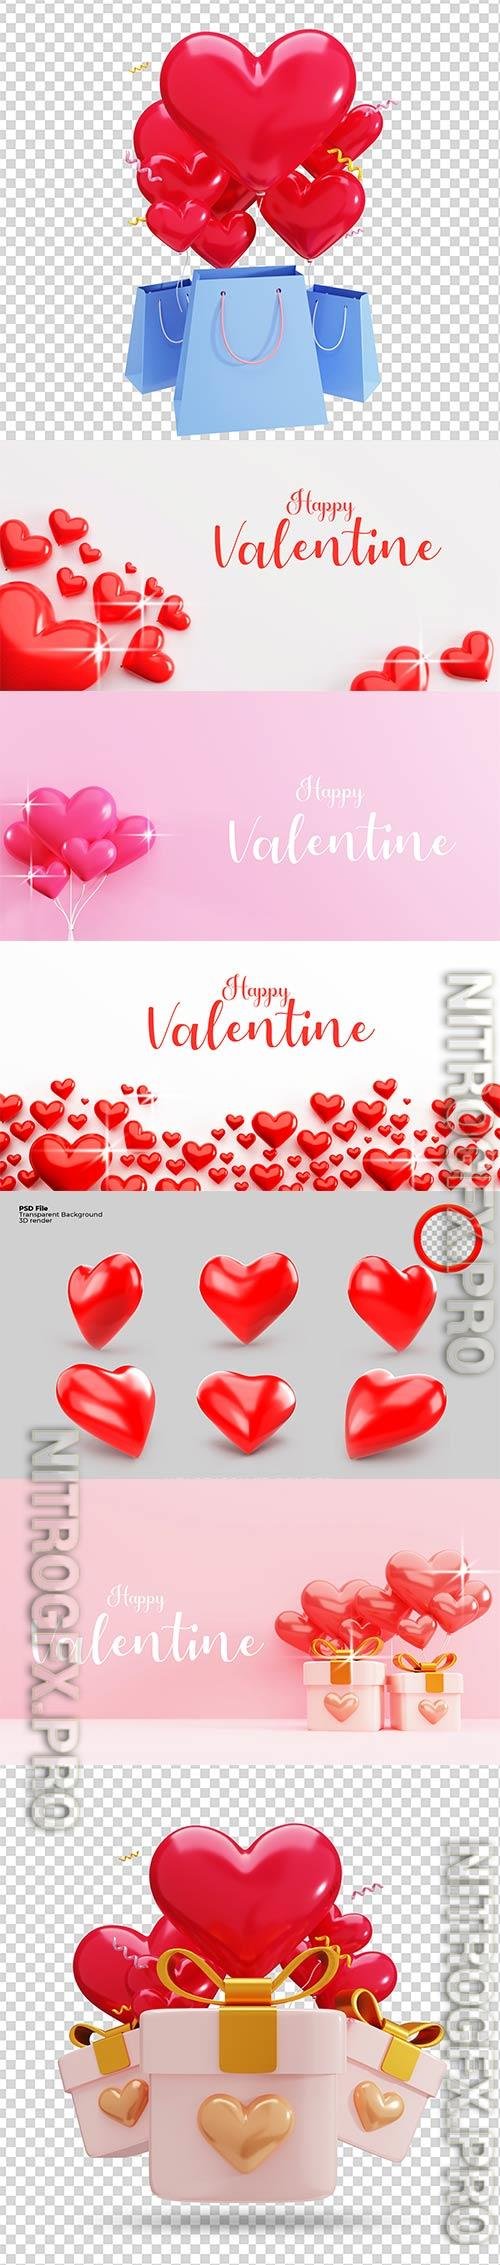 3D Rendering Of Valentine Concept Background PSD